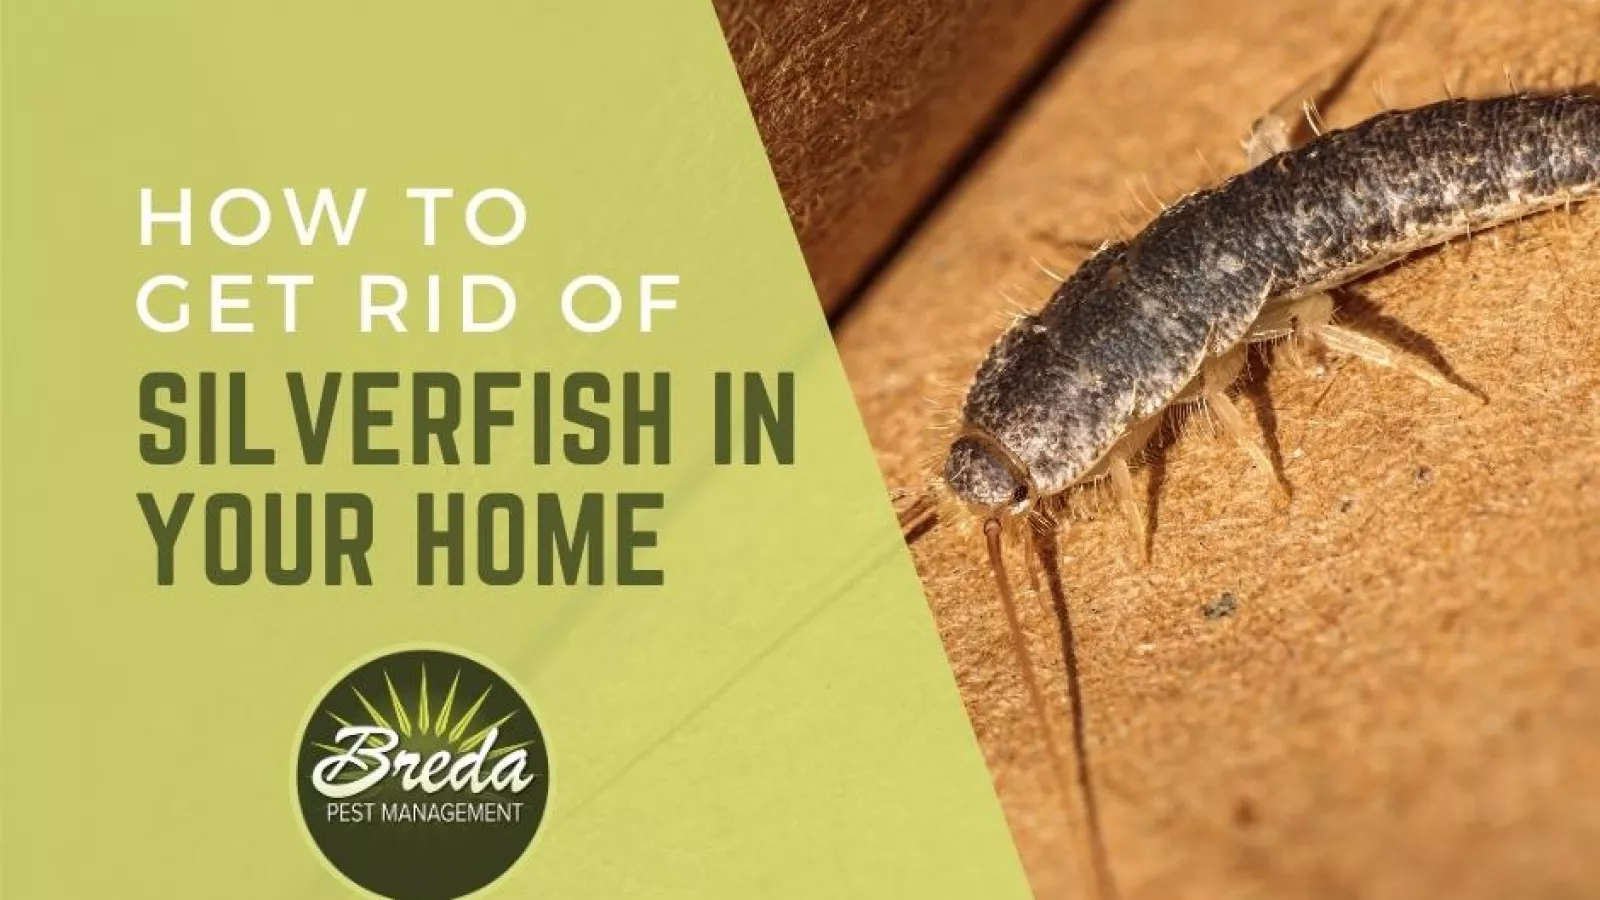 effective solutions how to get rid of silverfish and keep your home pest free